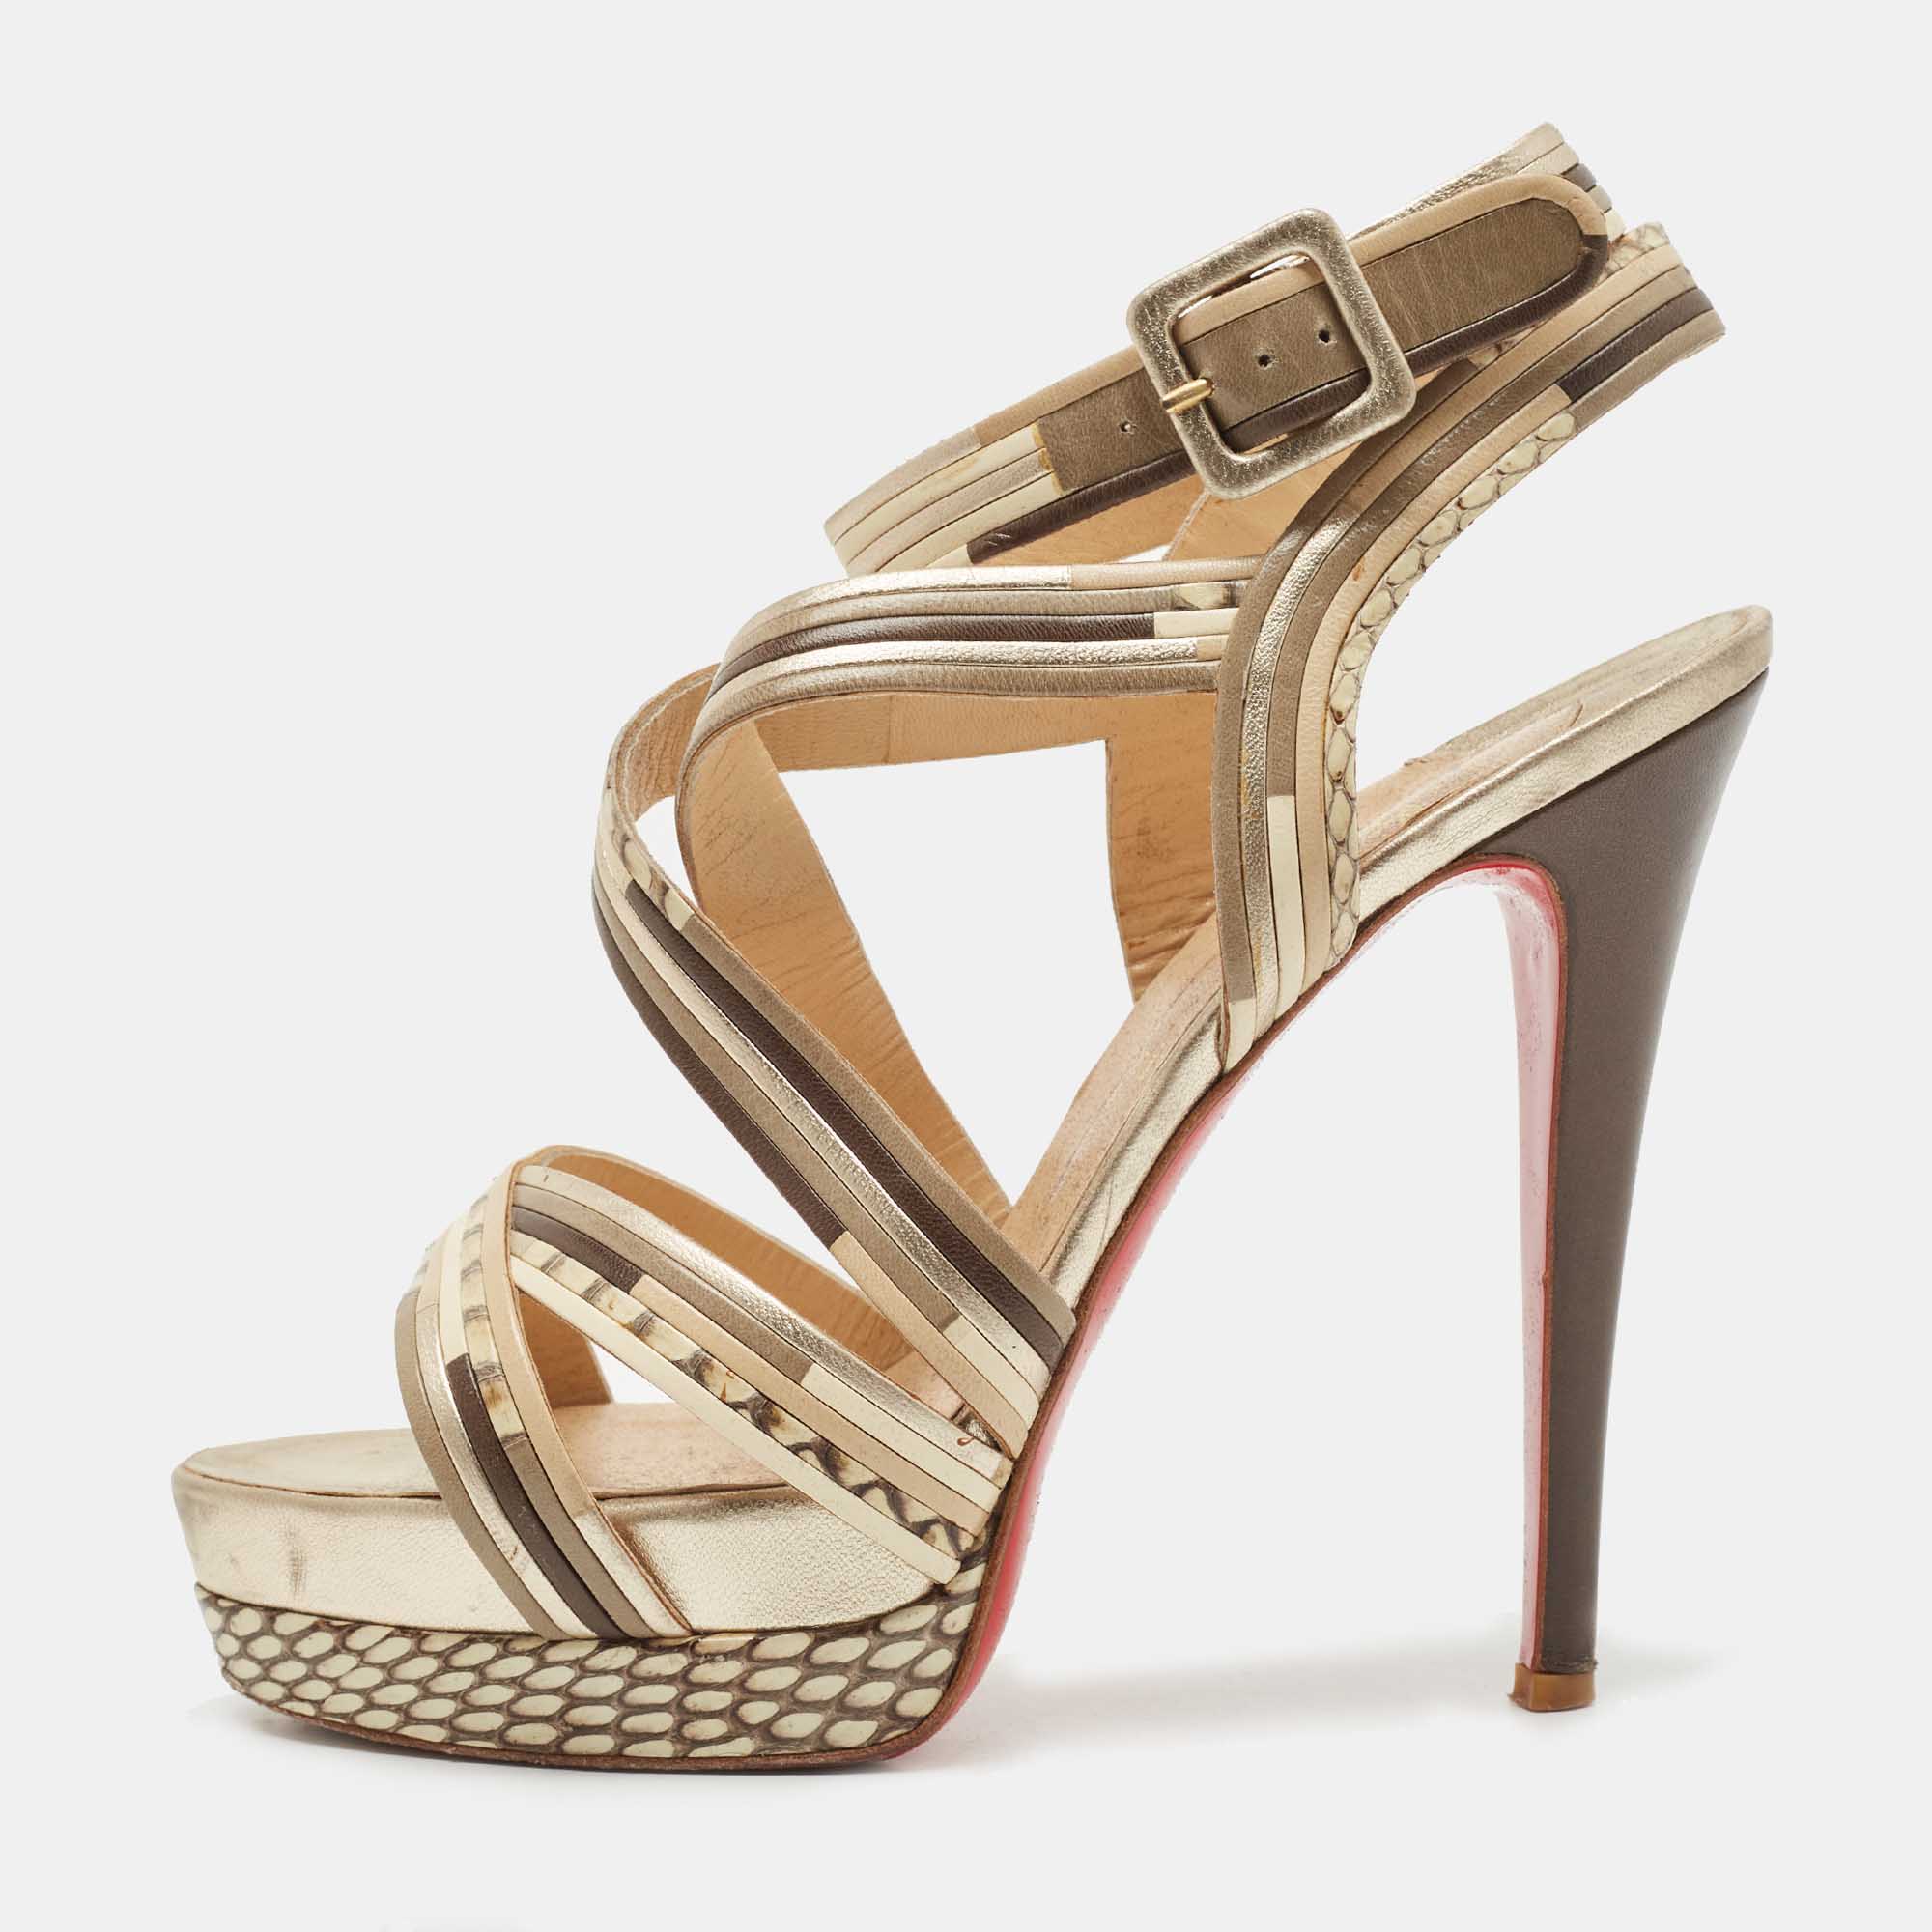 Christian Louboutin Brown/Beige Leather Strappy Platform Sandals Size 38.5